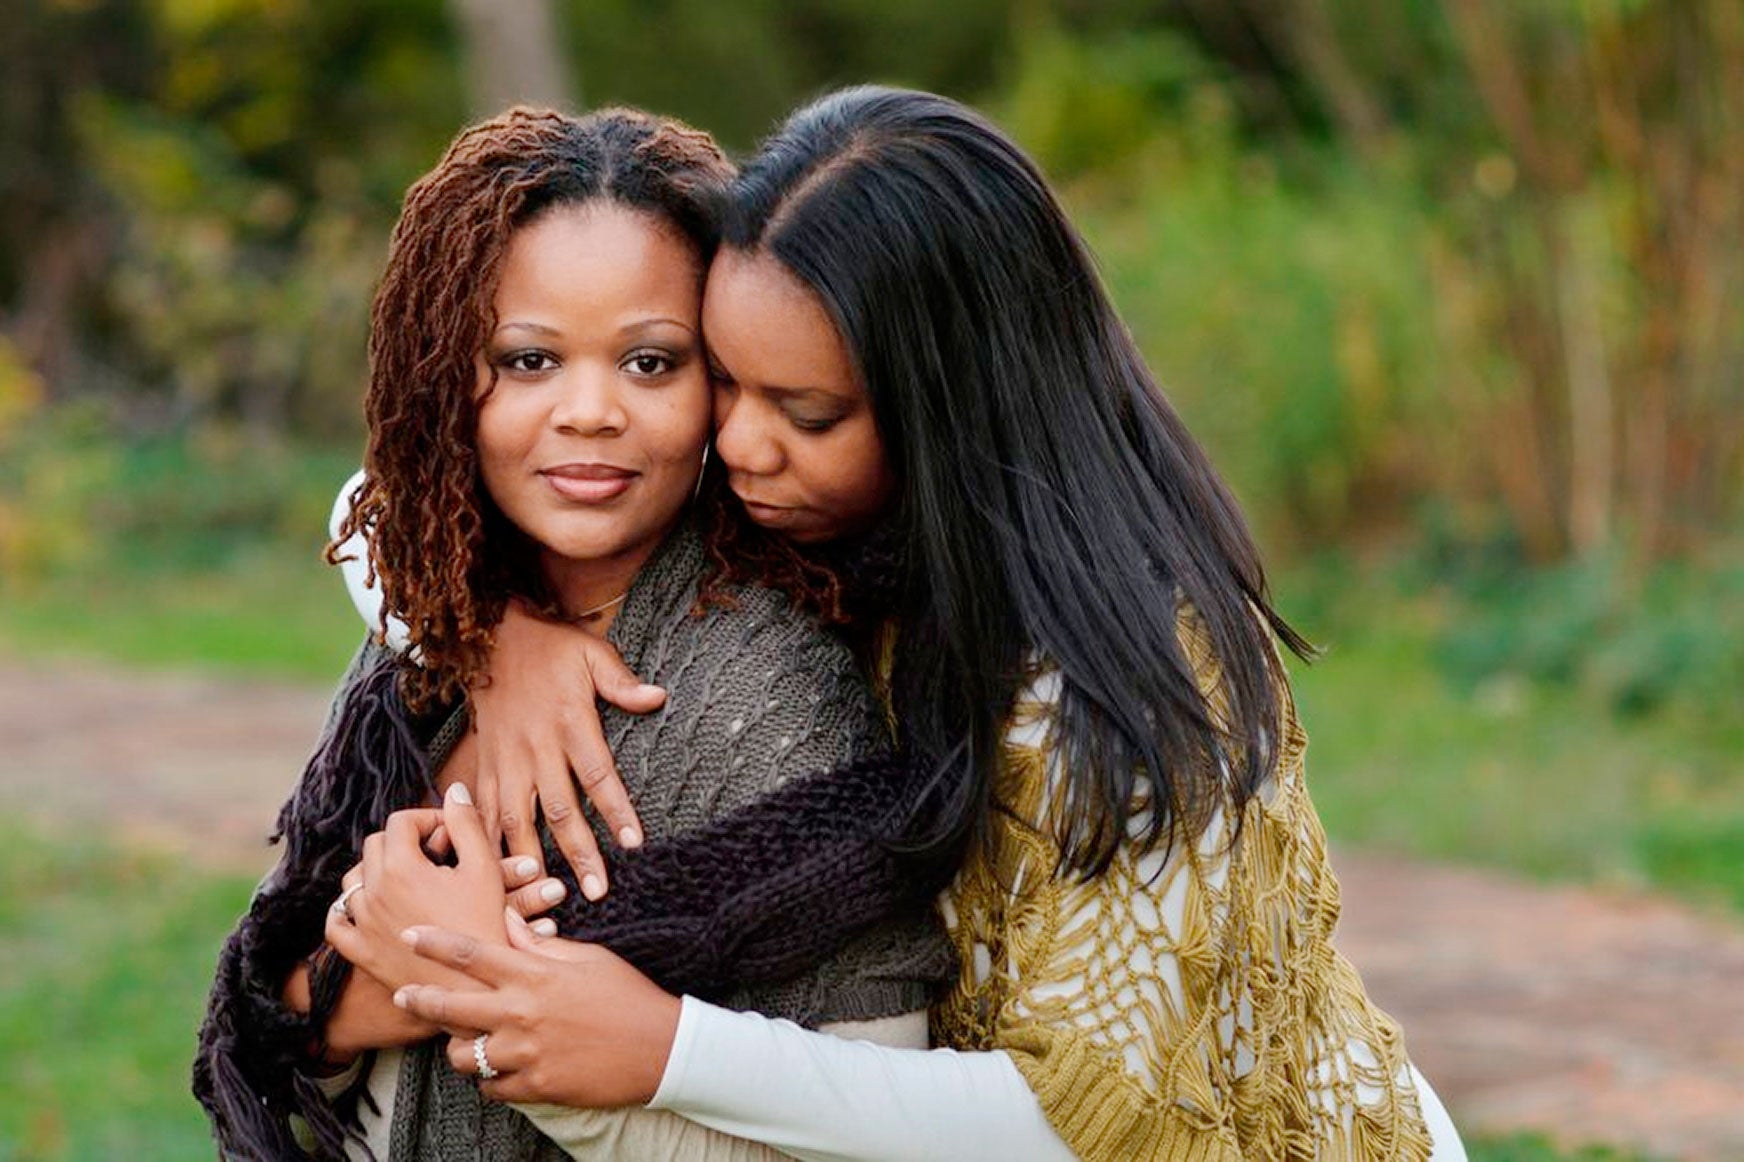 3 LGBTQ Couples Reflect On Being Liberated And Loved
